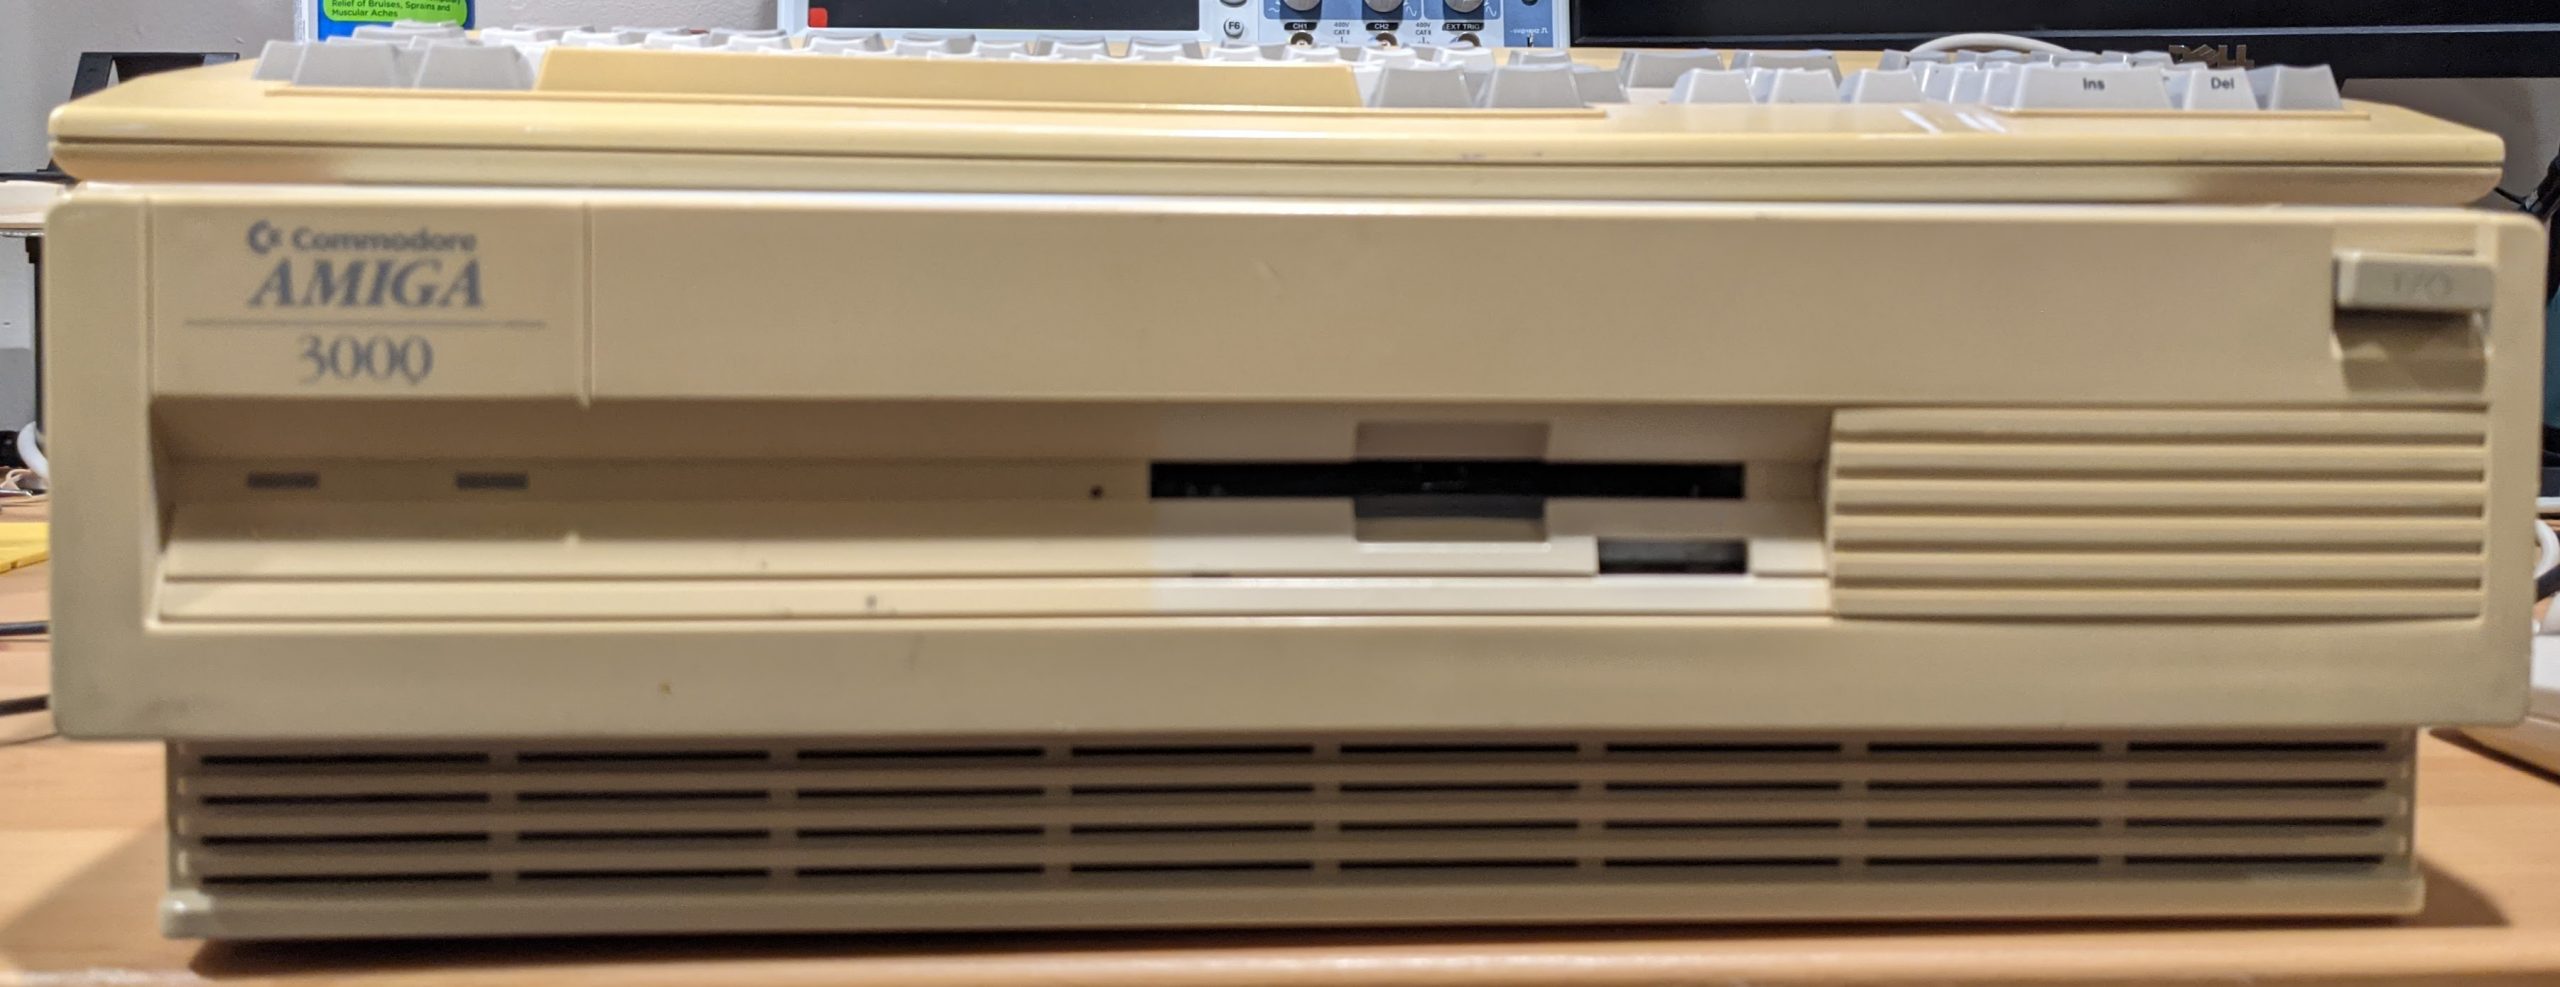 Image of the Amiga 3000 from the front